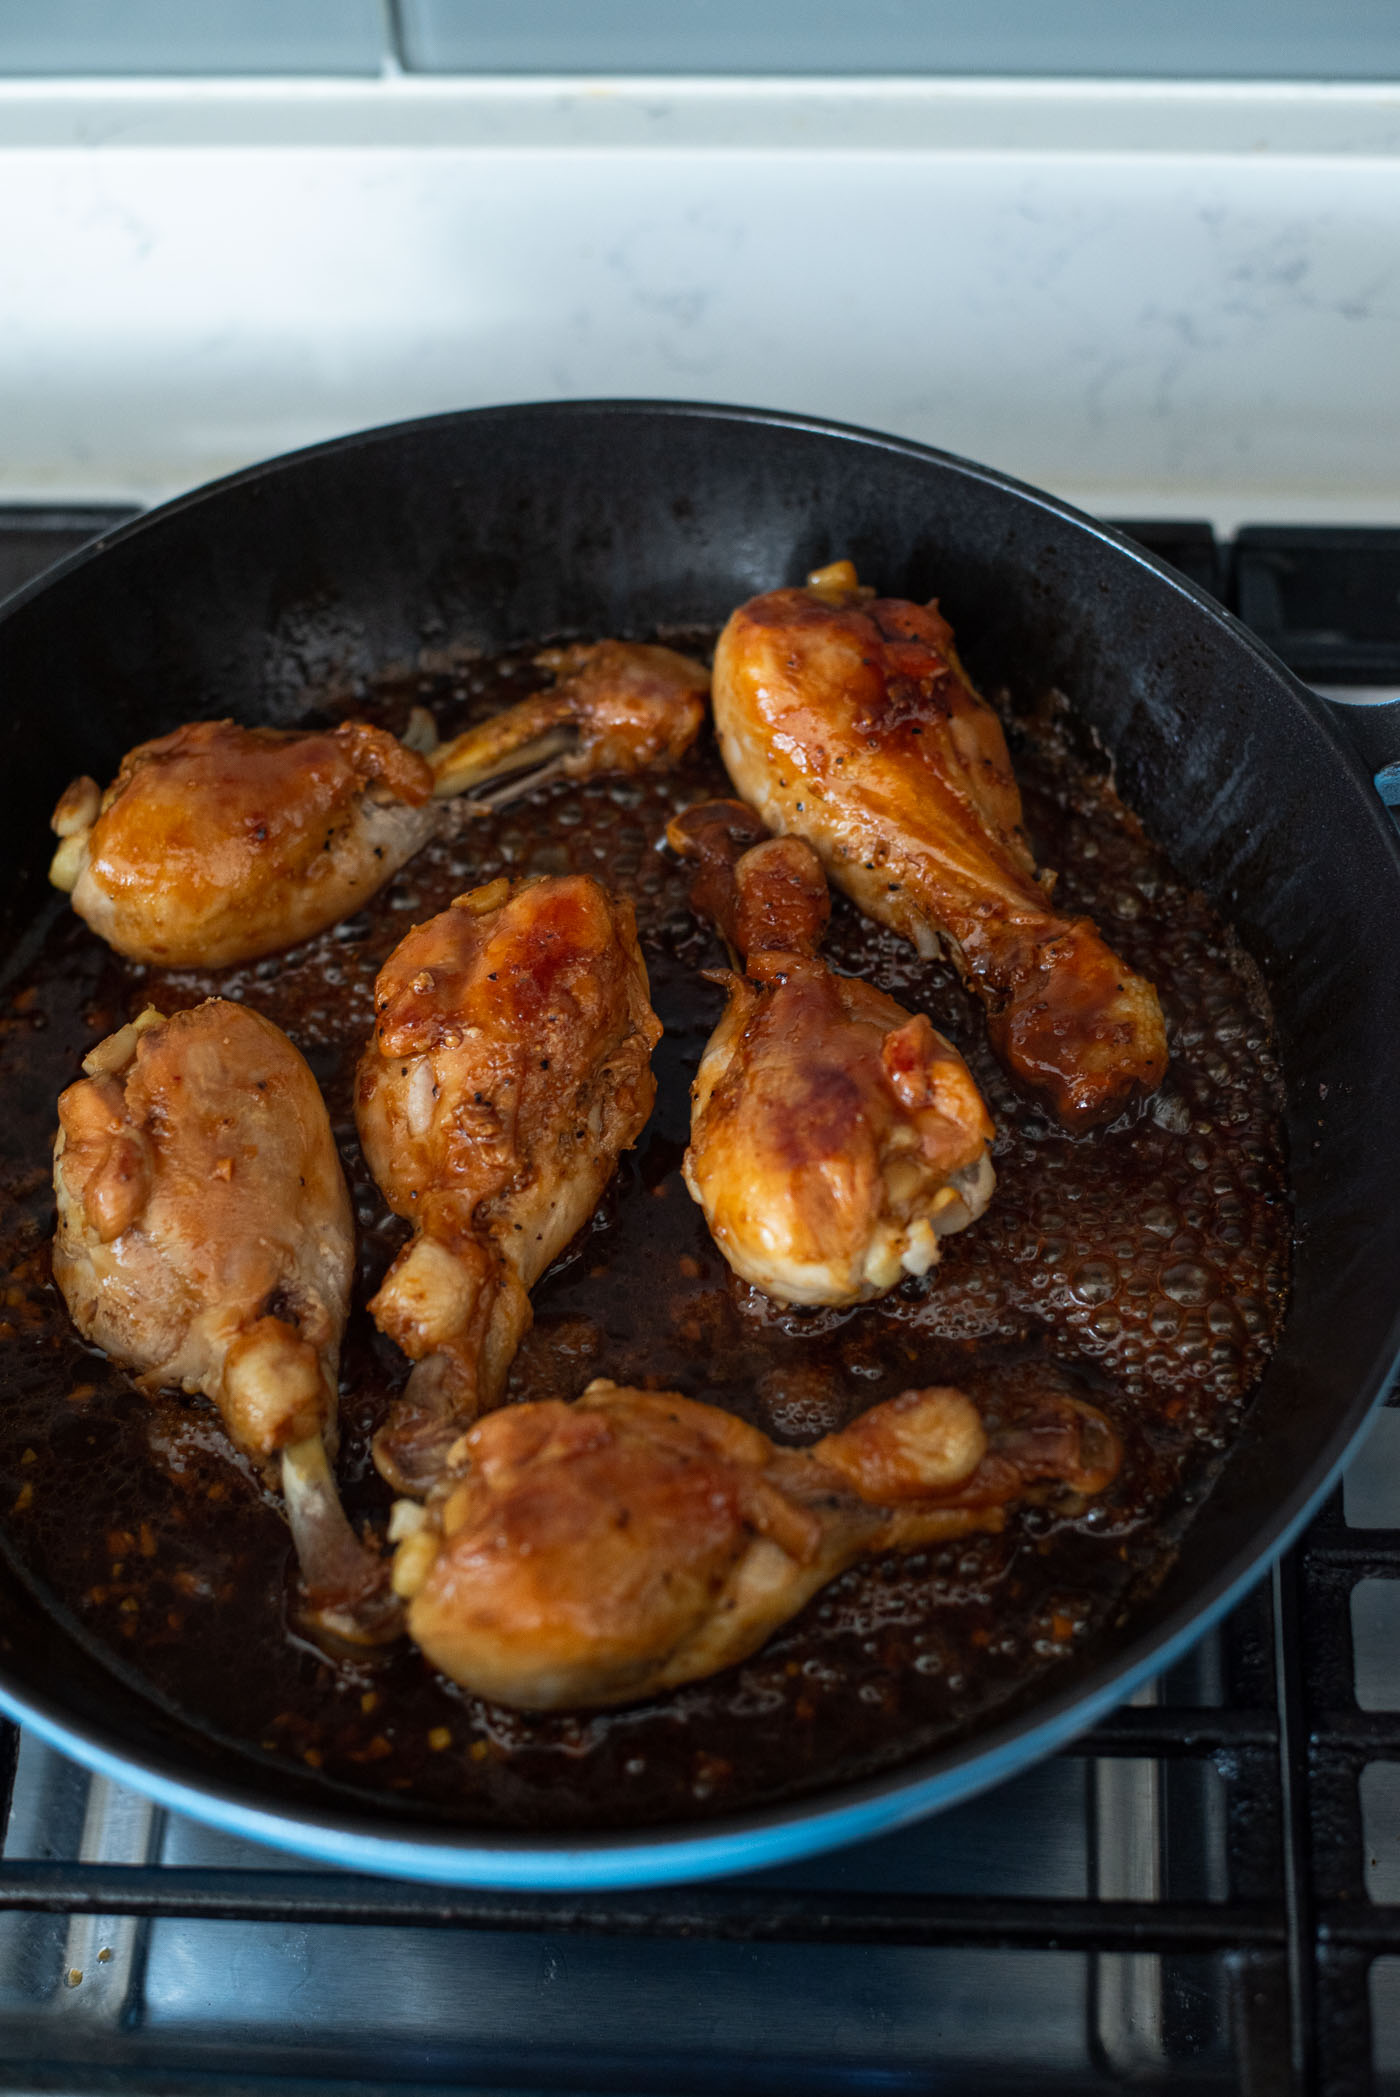 Teriyaki glaze is thickening in the pan coating chicken drumsticks in the pan